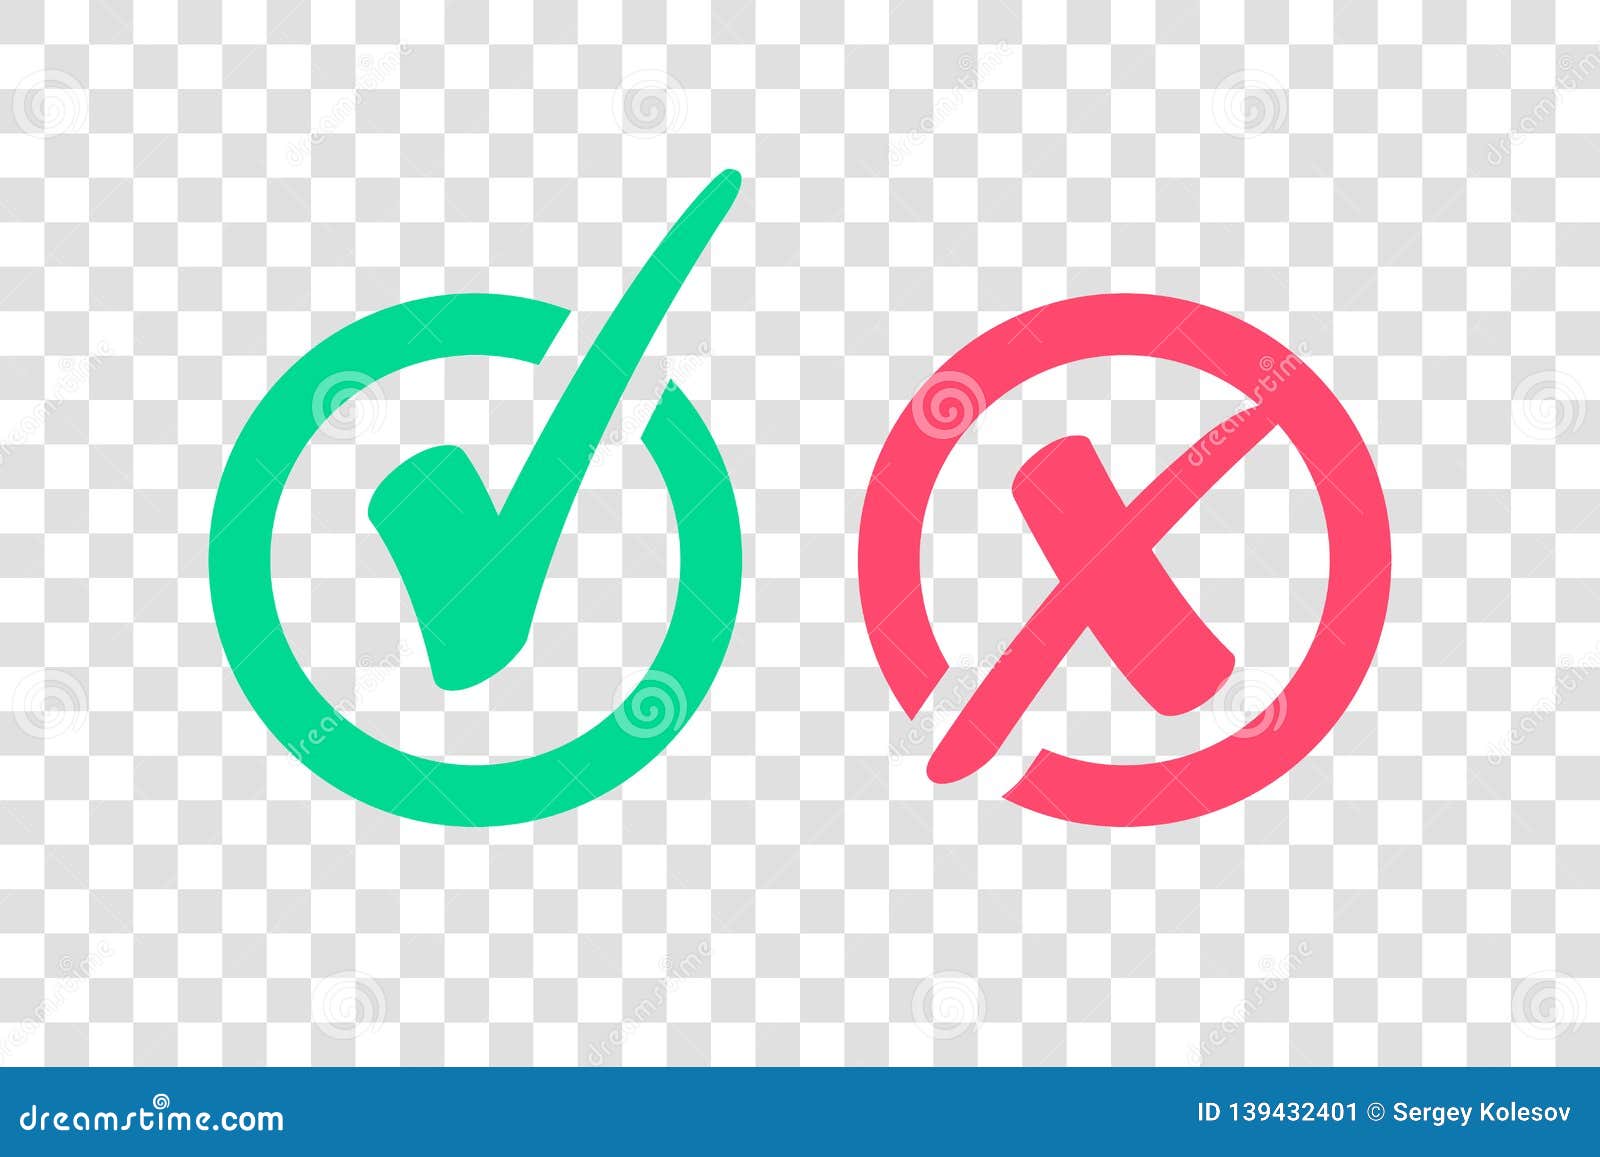 set of green check mark icon and red x cross tick 